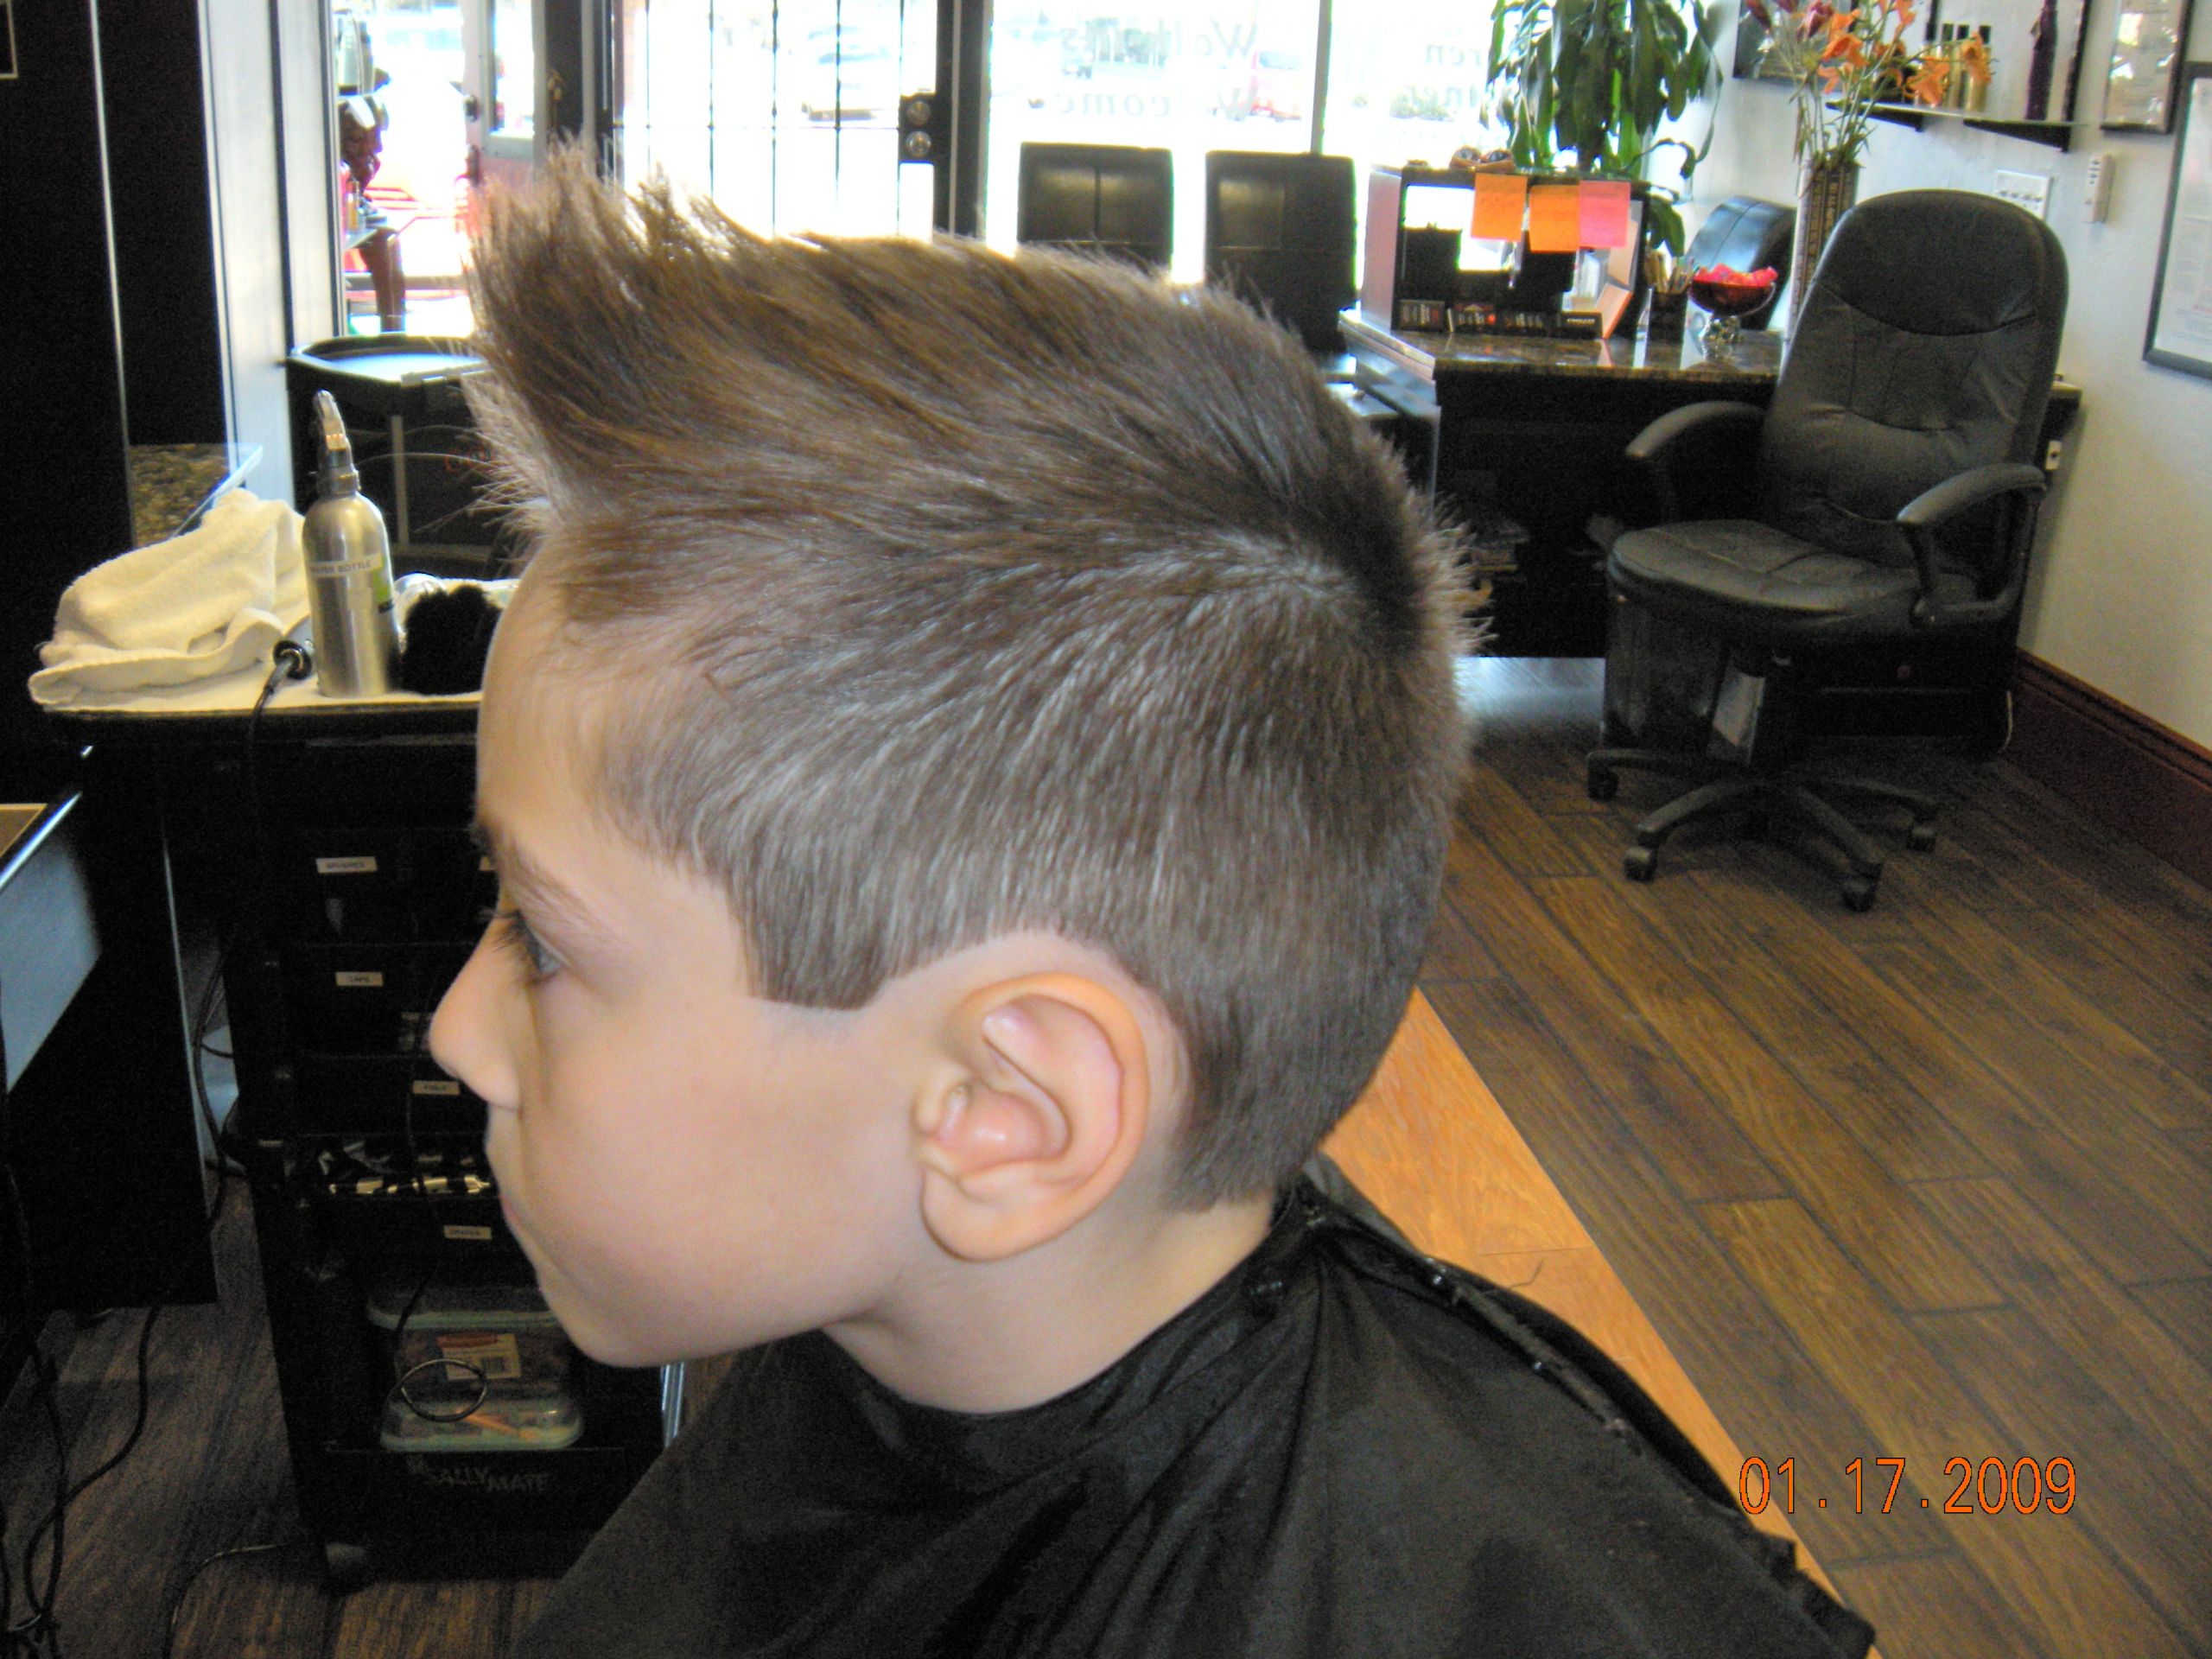 Kids Haircuts Sacramento
 Information about "Childrens fauxhawk JPG" on laurie b